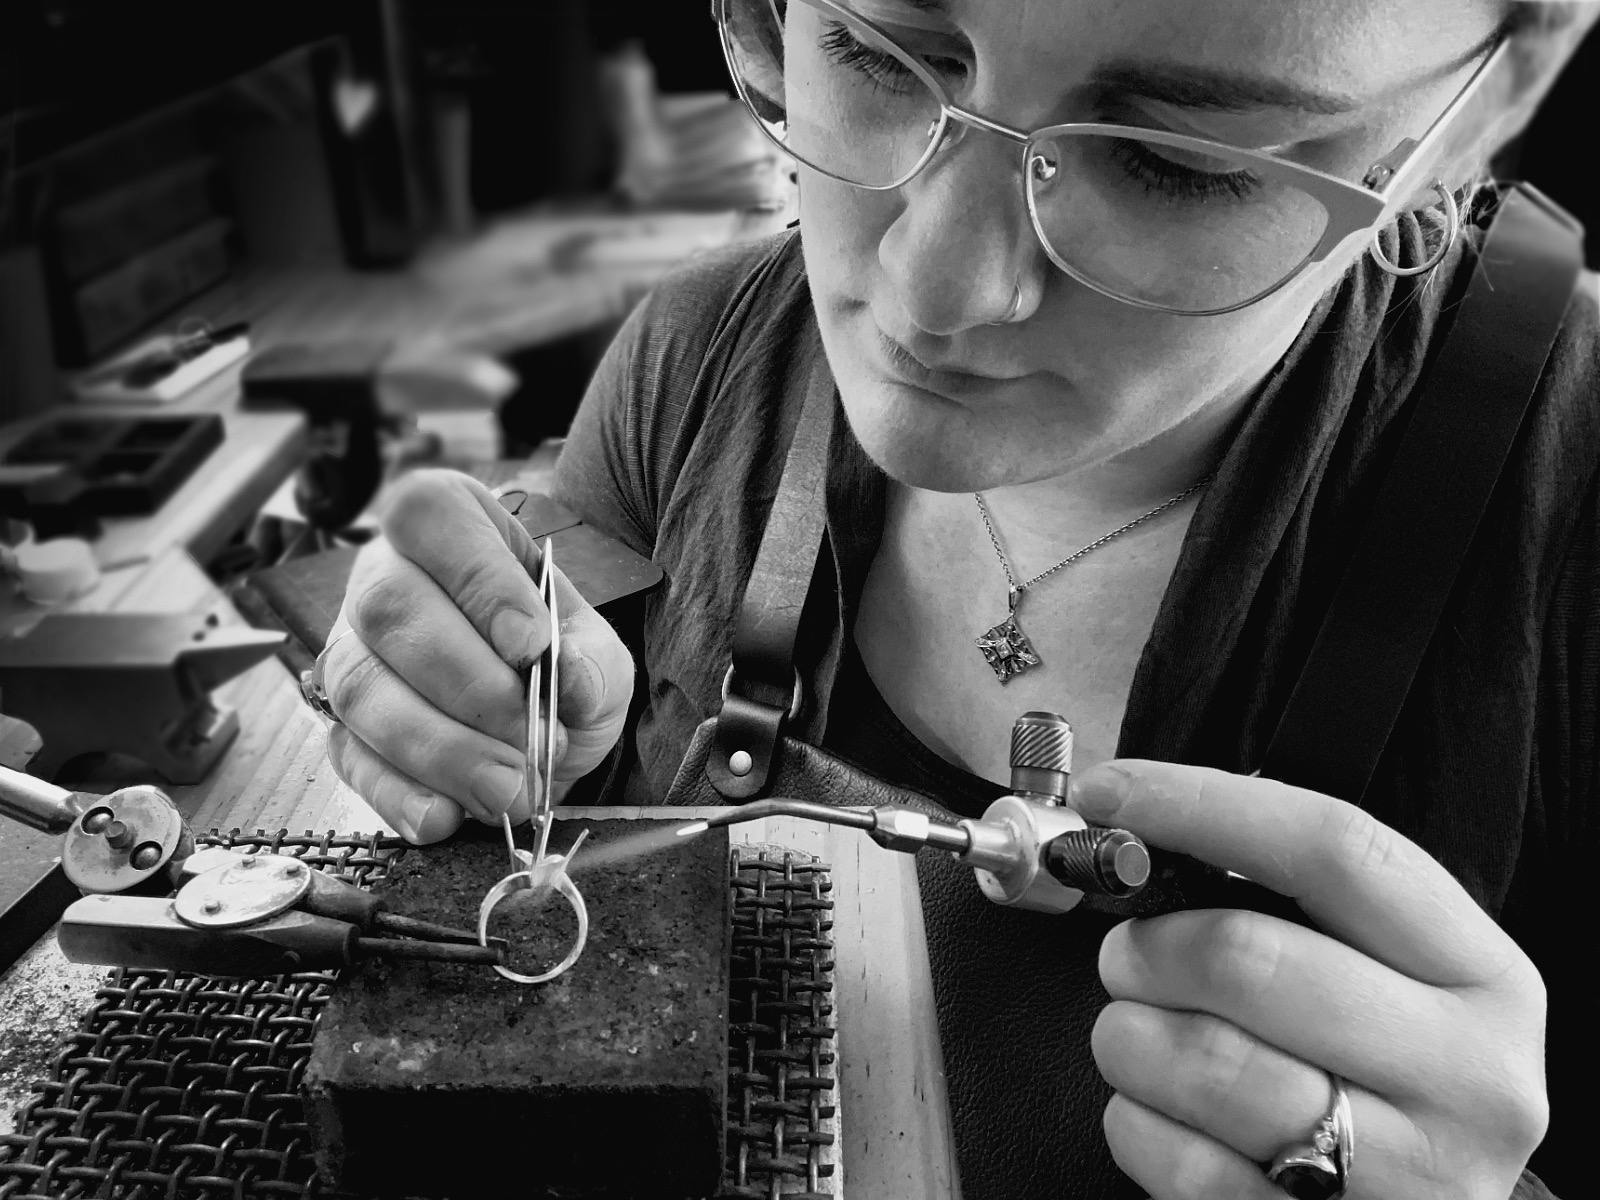 Emily setting gemstones in a hand-made ring